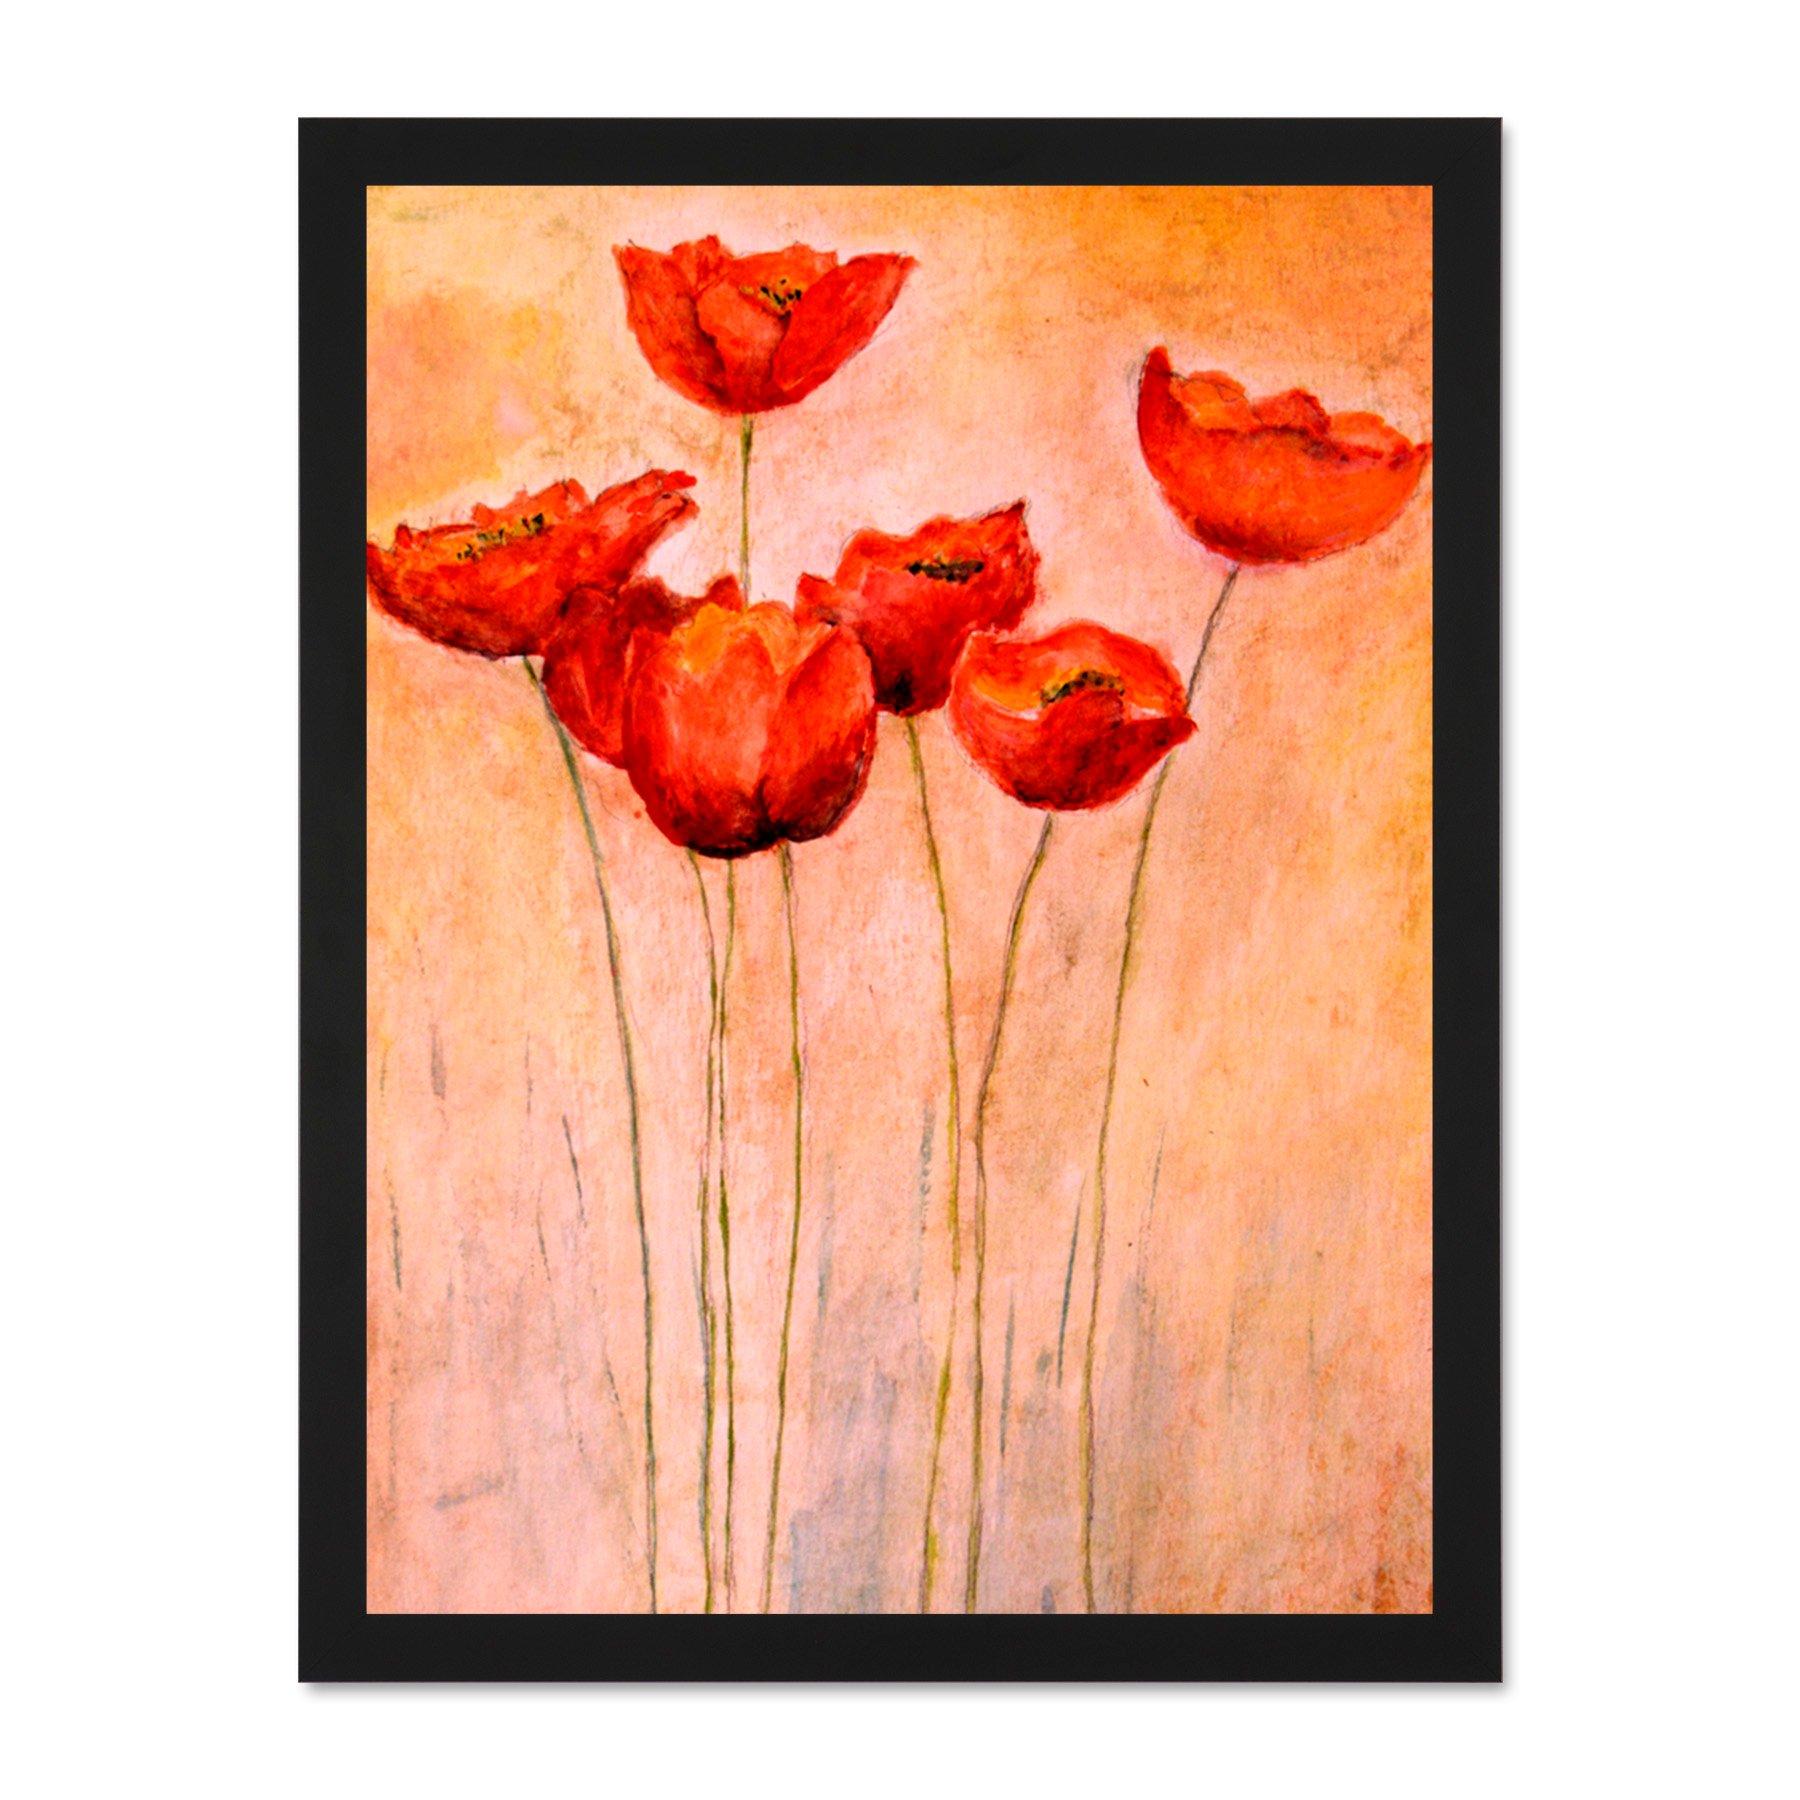 Flower Red Poppies Painting Large Large Framed Wall Decor Art Print